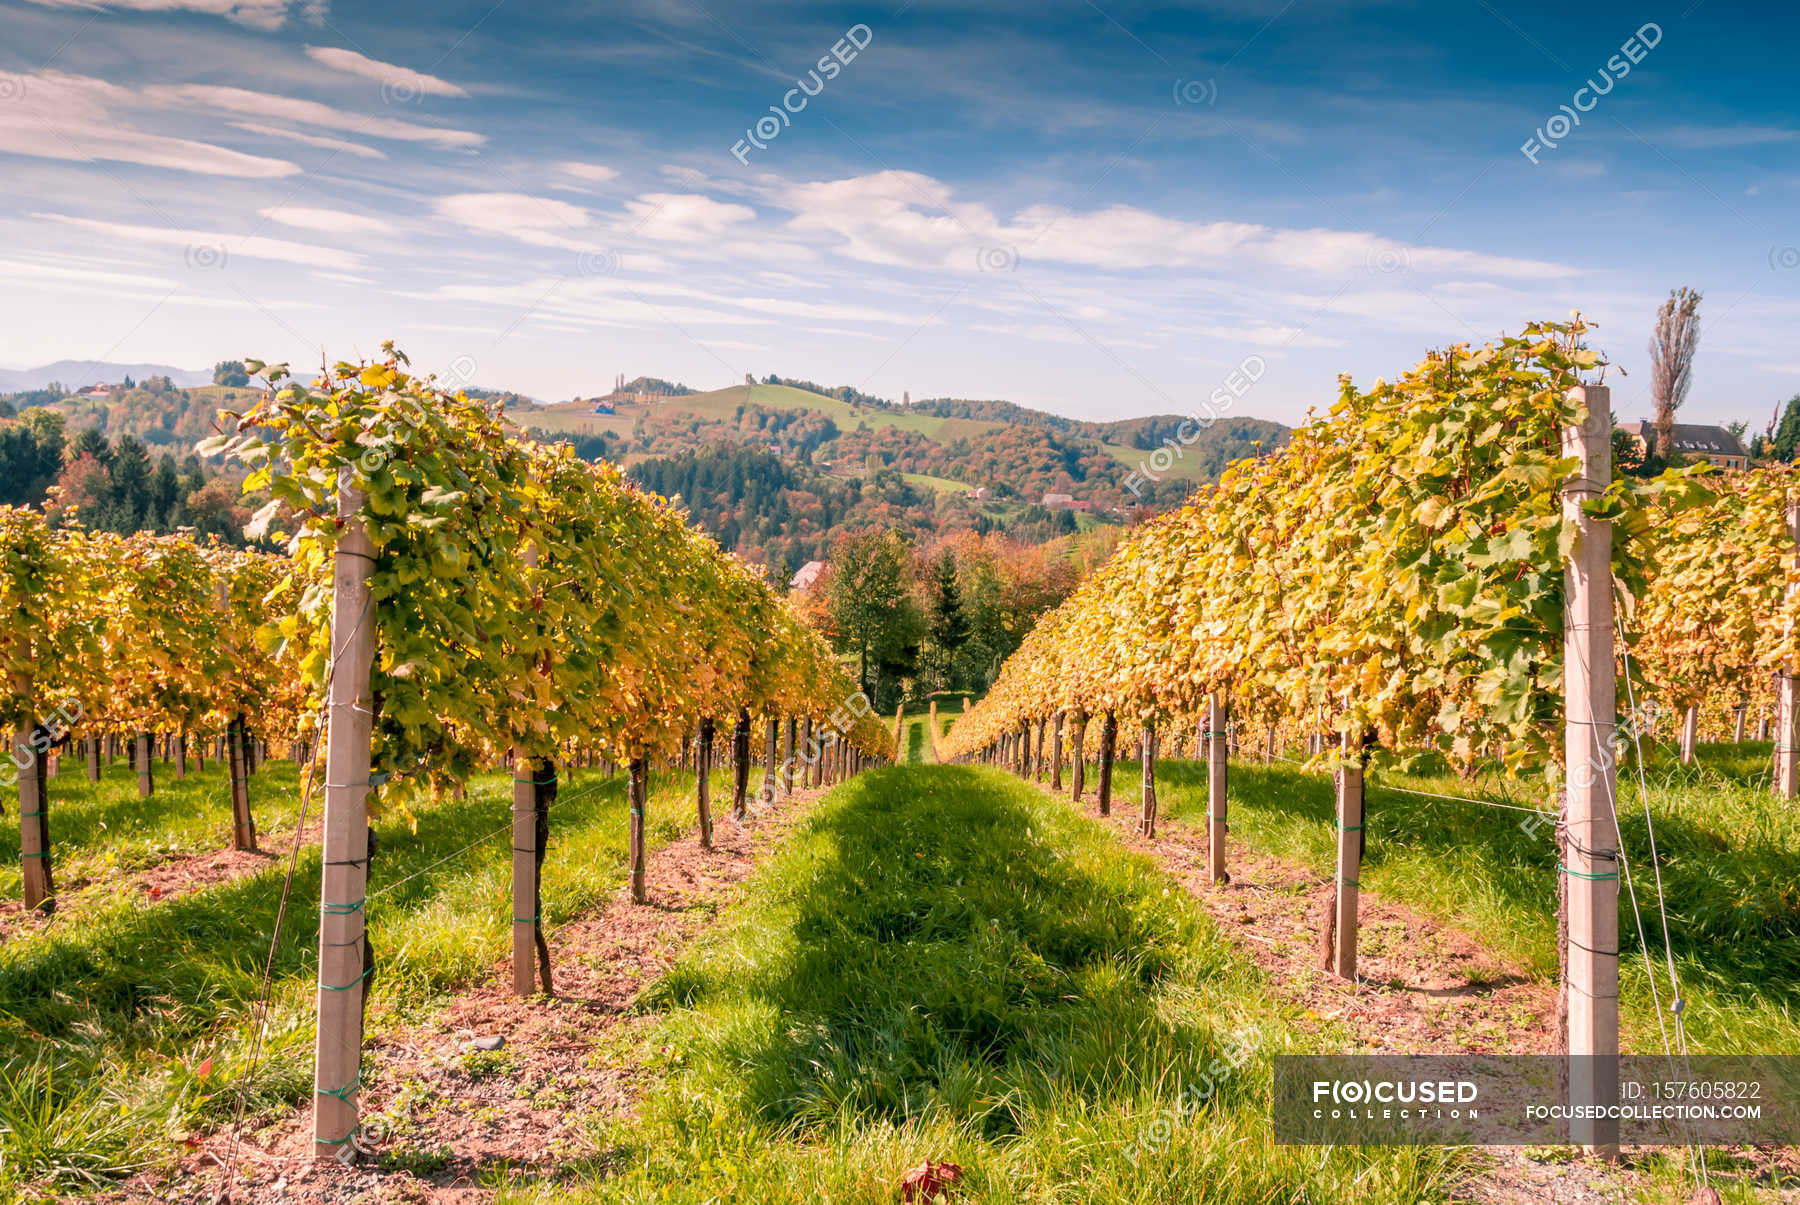 Landscape with wineyard rows — Stock Photo | #157605822